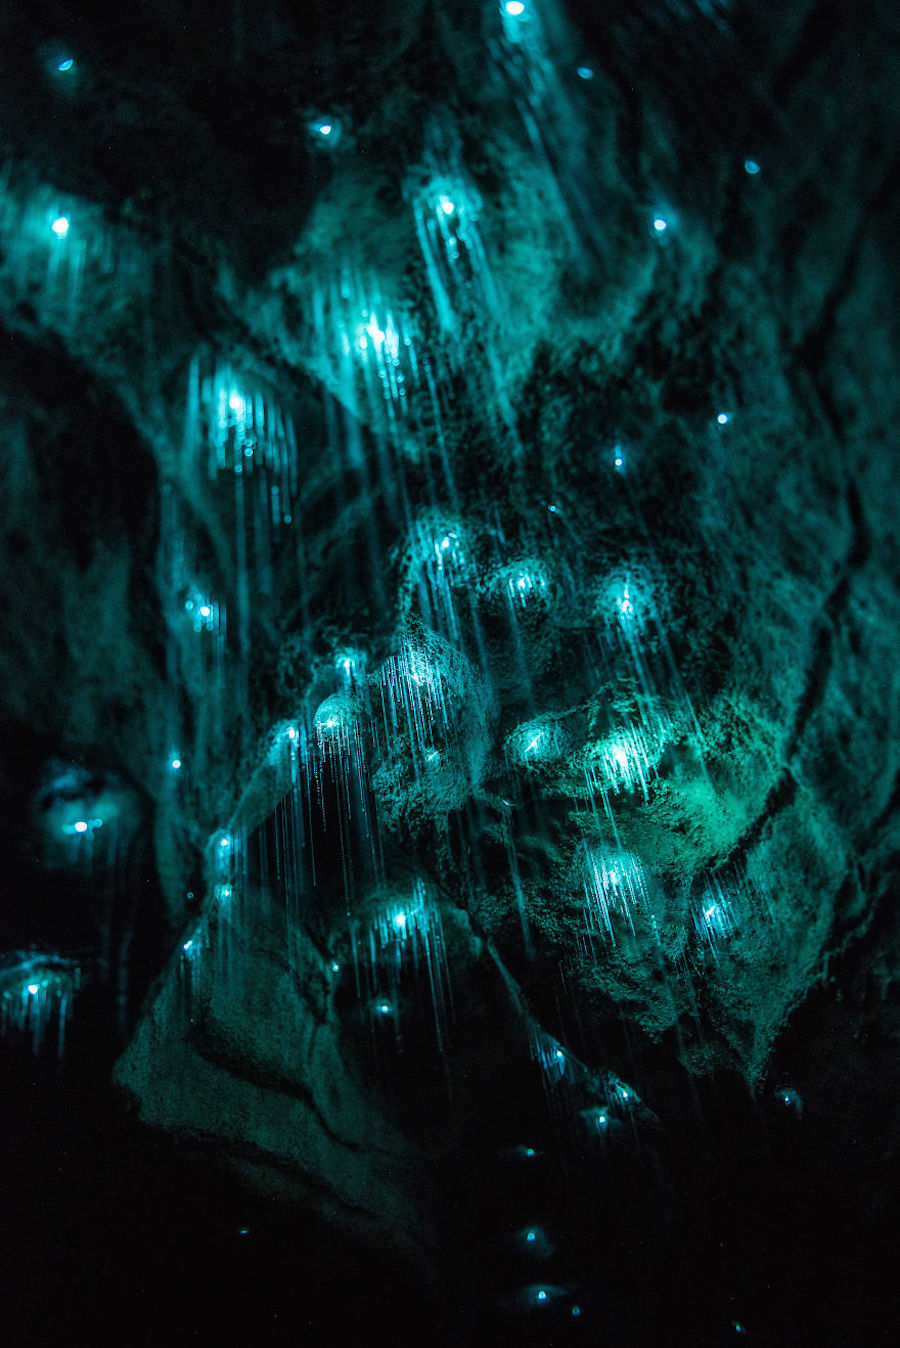 Mesmerizing Pictures of Glow Worms Lighting Up an Underground Cave.